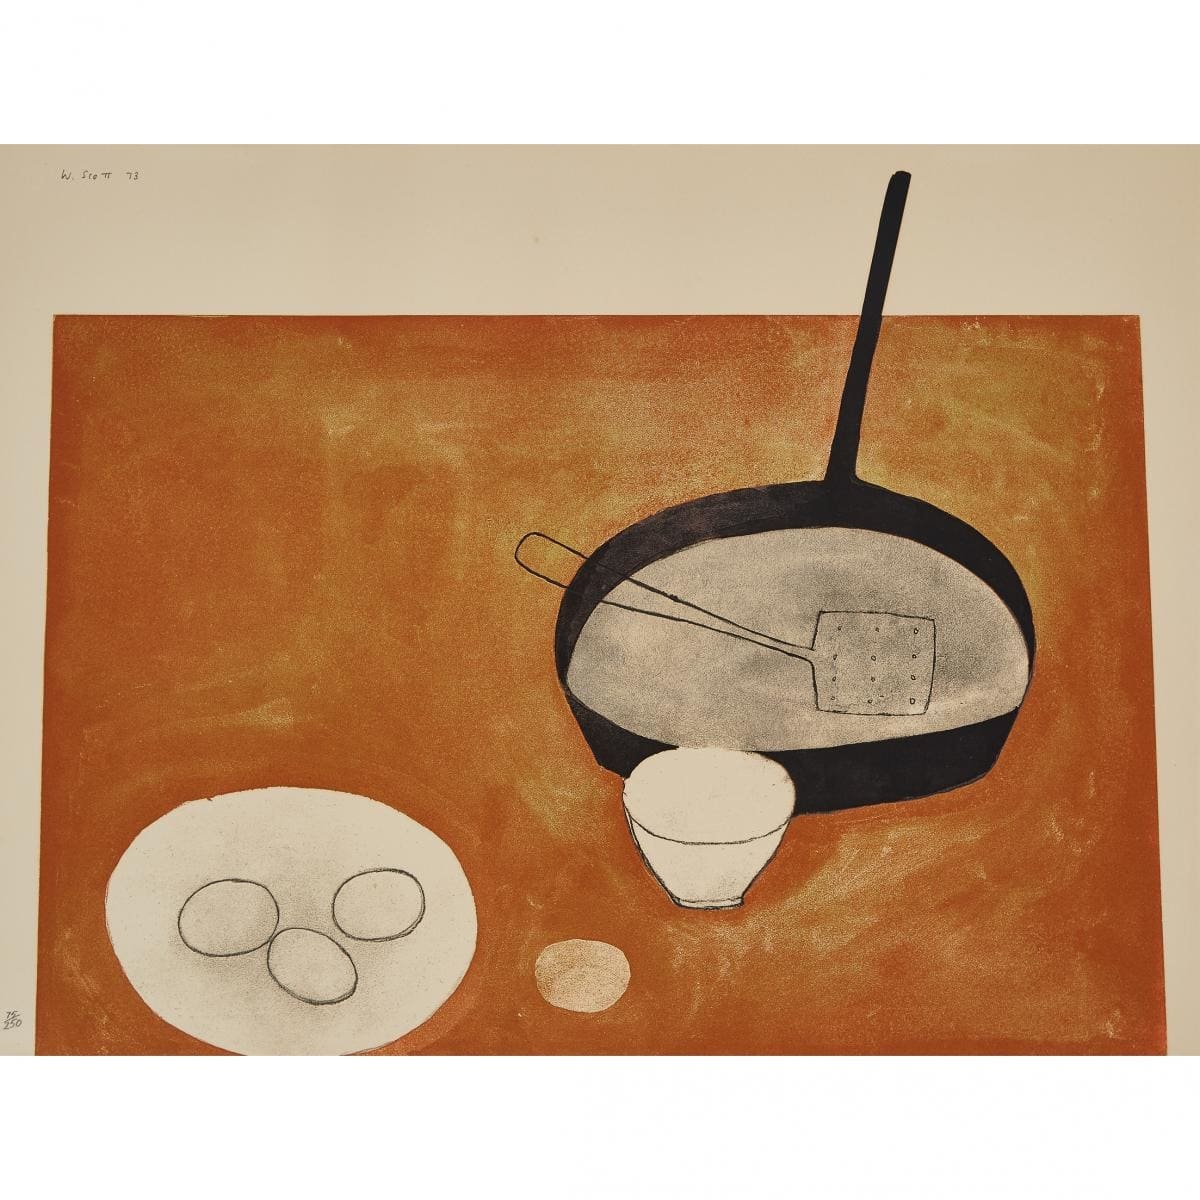 Still Life (With Frying Pan), 1973 by William Scott 